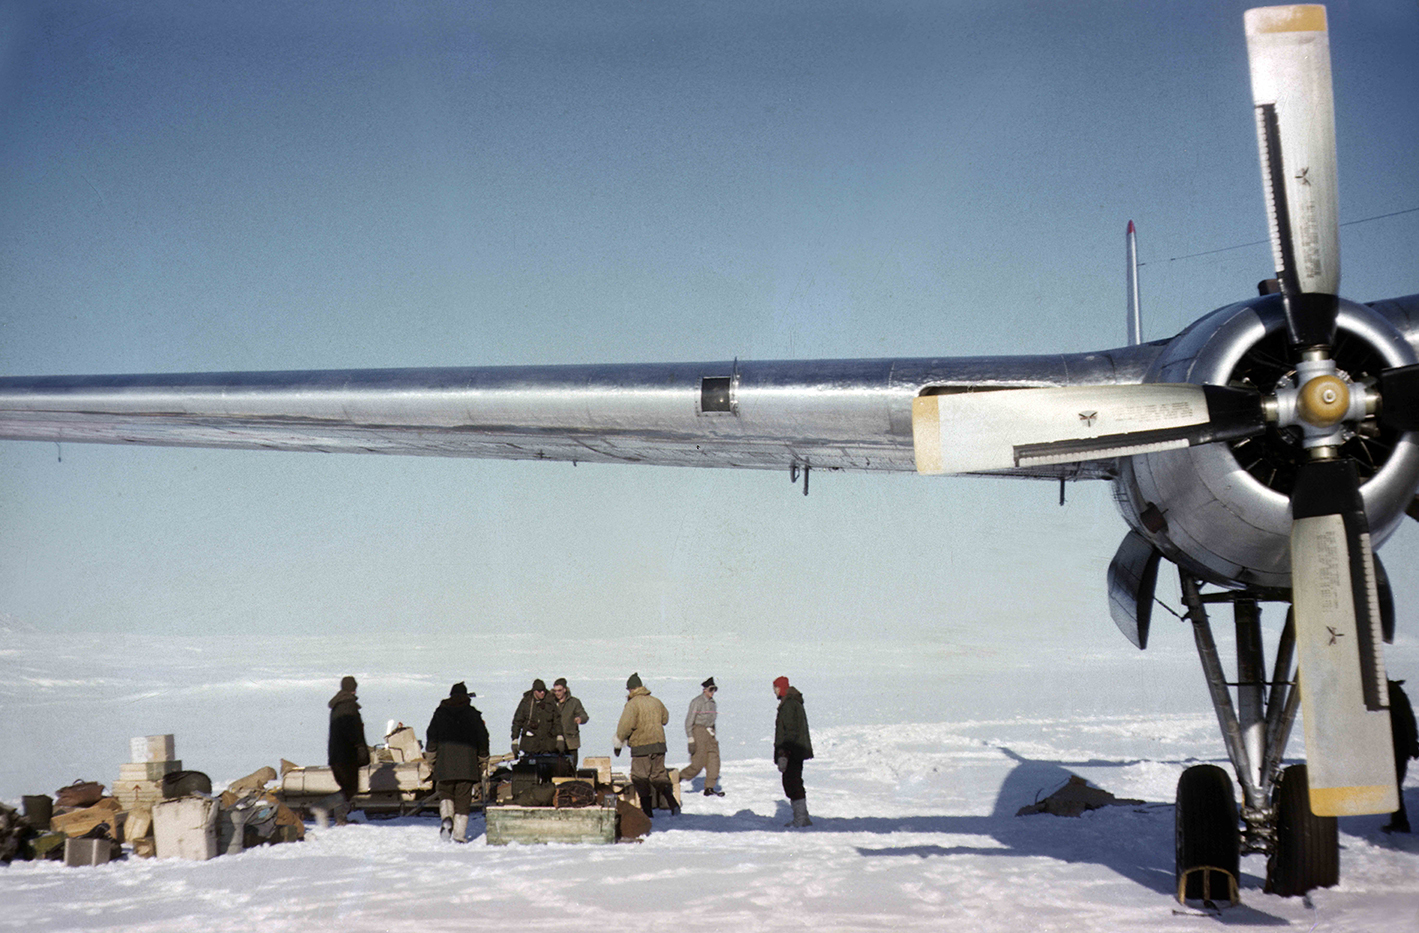 Defence Research and Development Canada (DRDC) has been conducting research at Alert and in the High Arctic for the past 60 years. Provided by Library and Archives Canada.